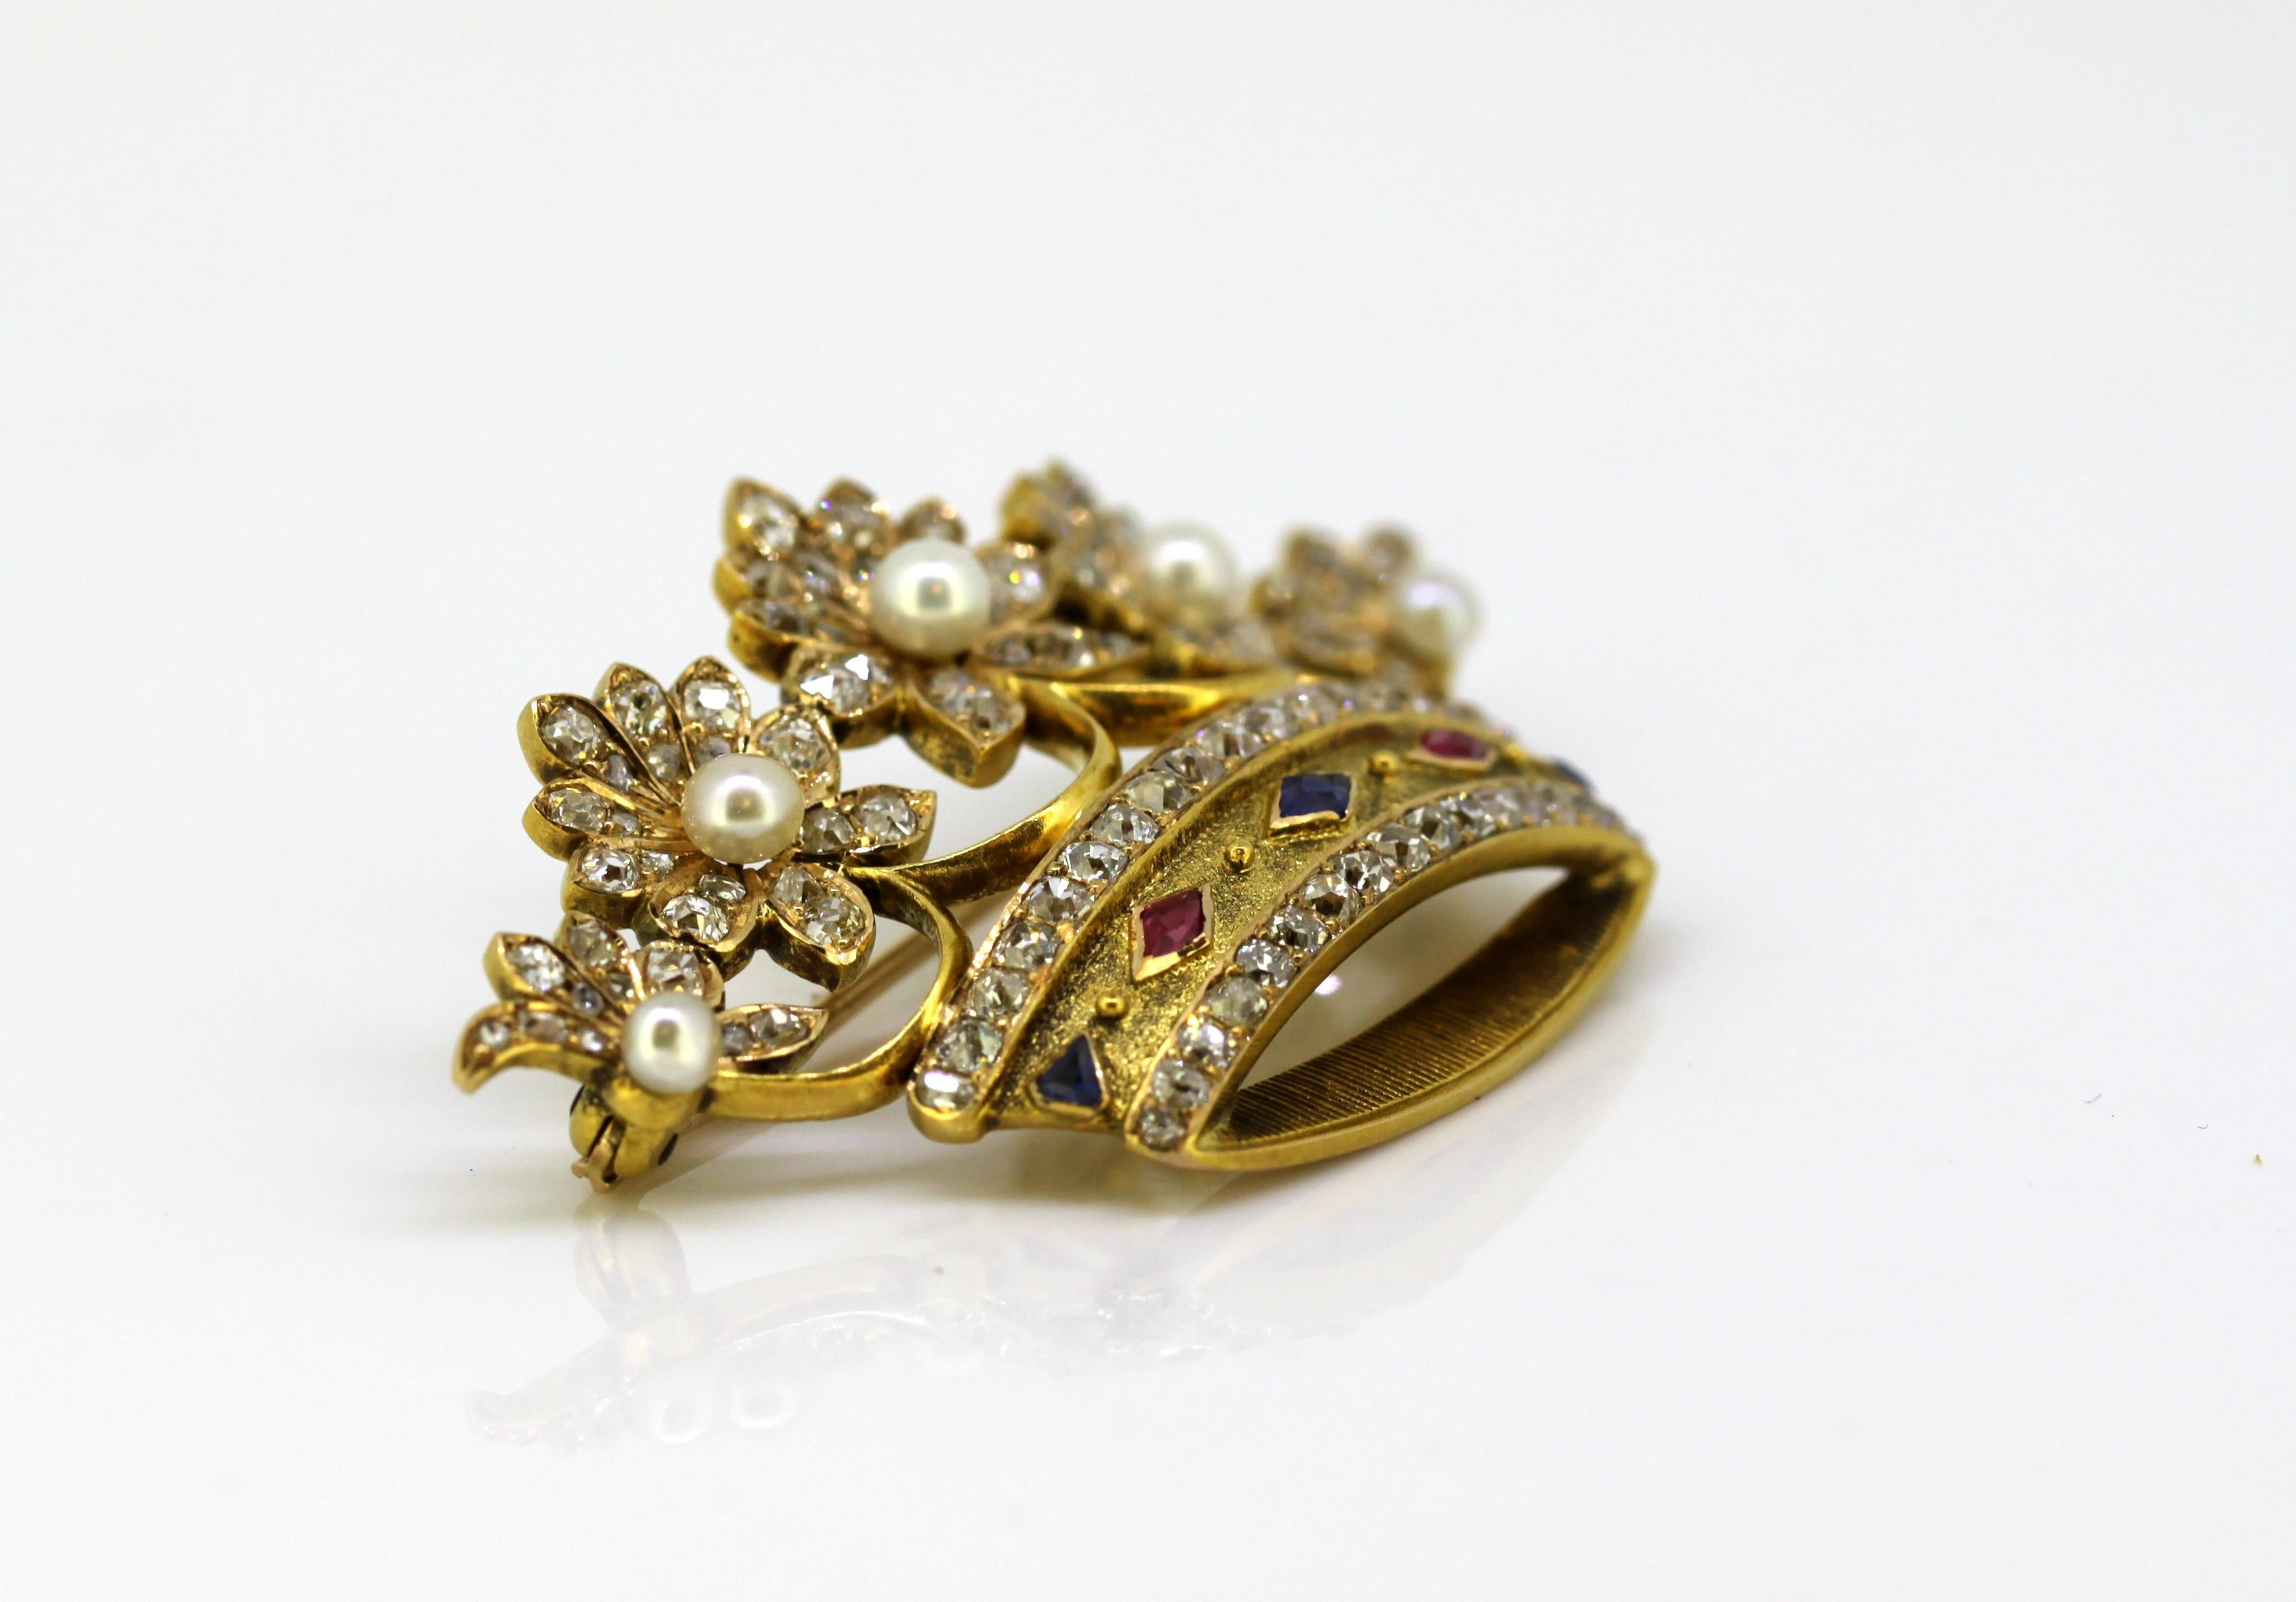 French 18 Karat Gold Brooch with Pearls Diamonds Rubies and Sapphires 7